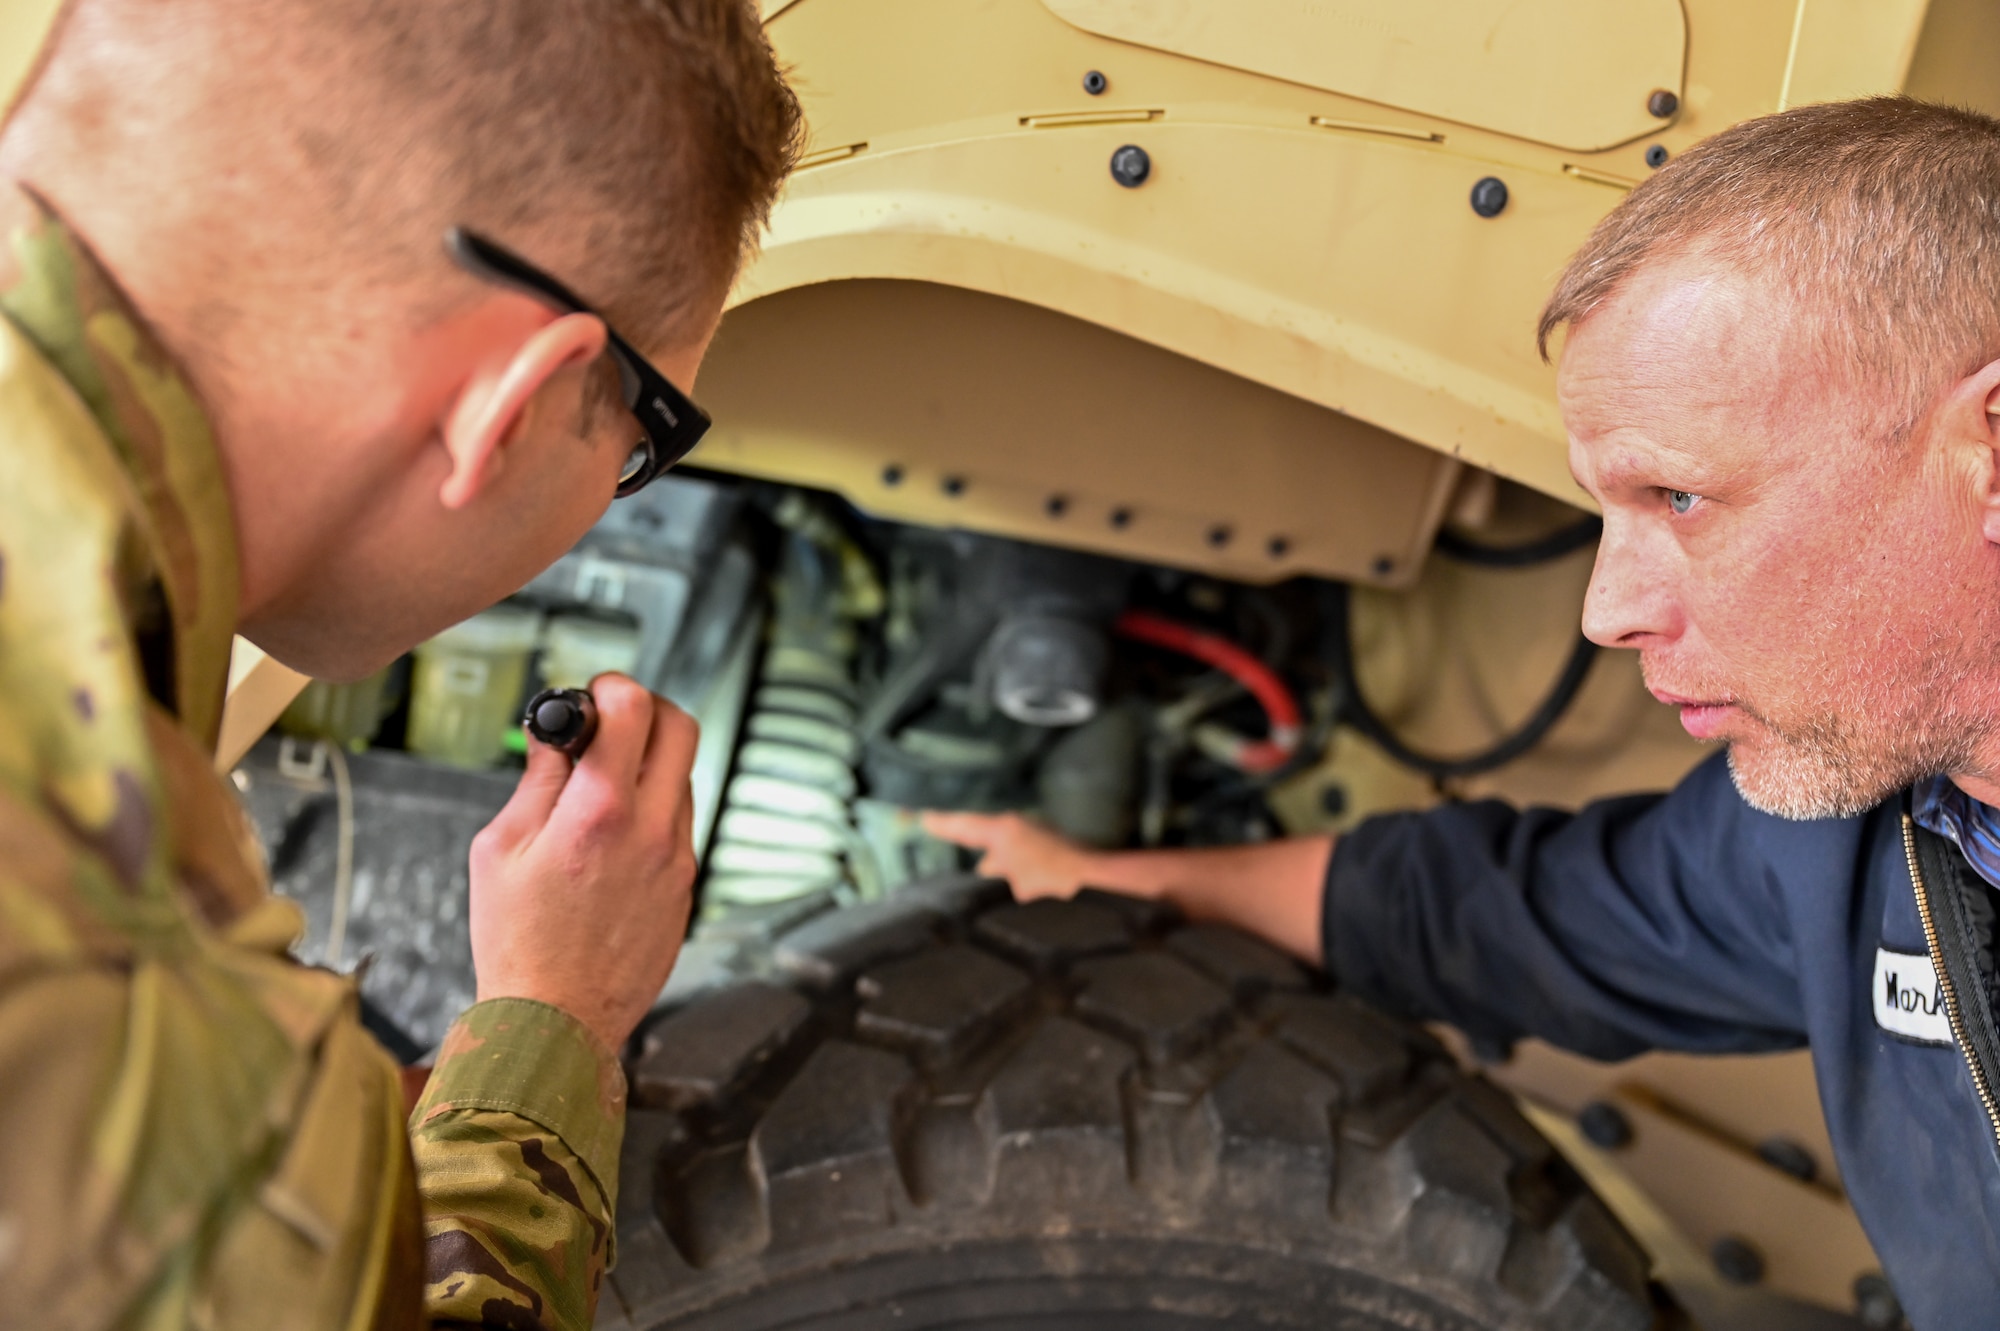 Mark Bramman, 90th Logistics Readiness Squadron vehicle maintenance craftsman, shows Senior Airman Korey Sarantopoulos, 90 LRS vehicle maintenance journeyman, the brake reservoir for the independent suspension as part of a Joint Light Tactical Vehicle limited technical inspection at F.E. Warren Air Force Base, Wyoming, Oct 25, 2022. The 90 LRS is tasked with preparing the next generation of security forces vehicles sent to protect the 90th Missile Wing's ICBM system as part of Air Force Global Strike Command’s priority to modernize. (U.S. Air Force photo by Joseph Coslett)